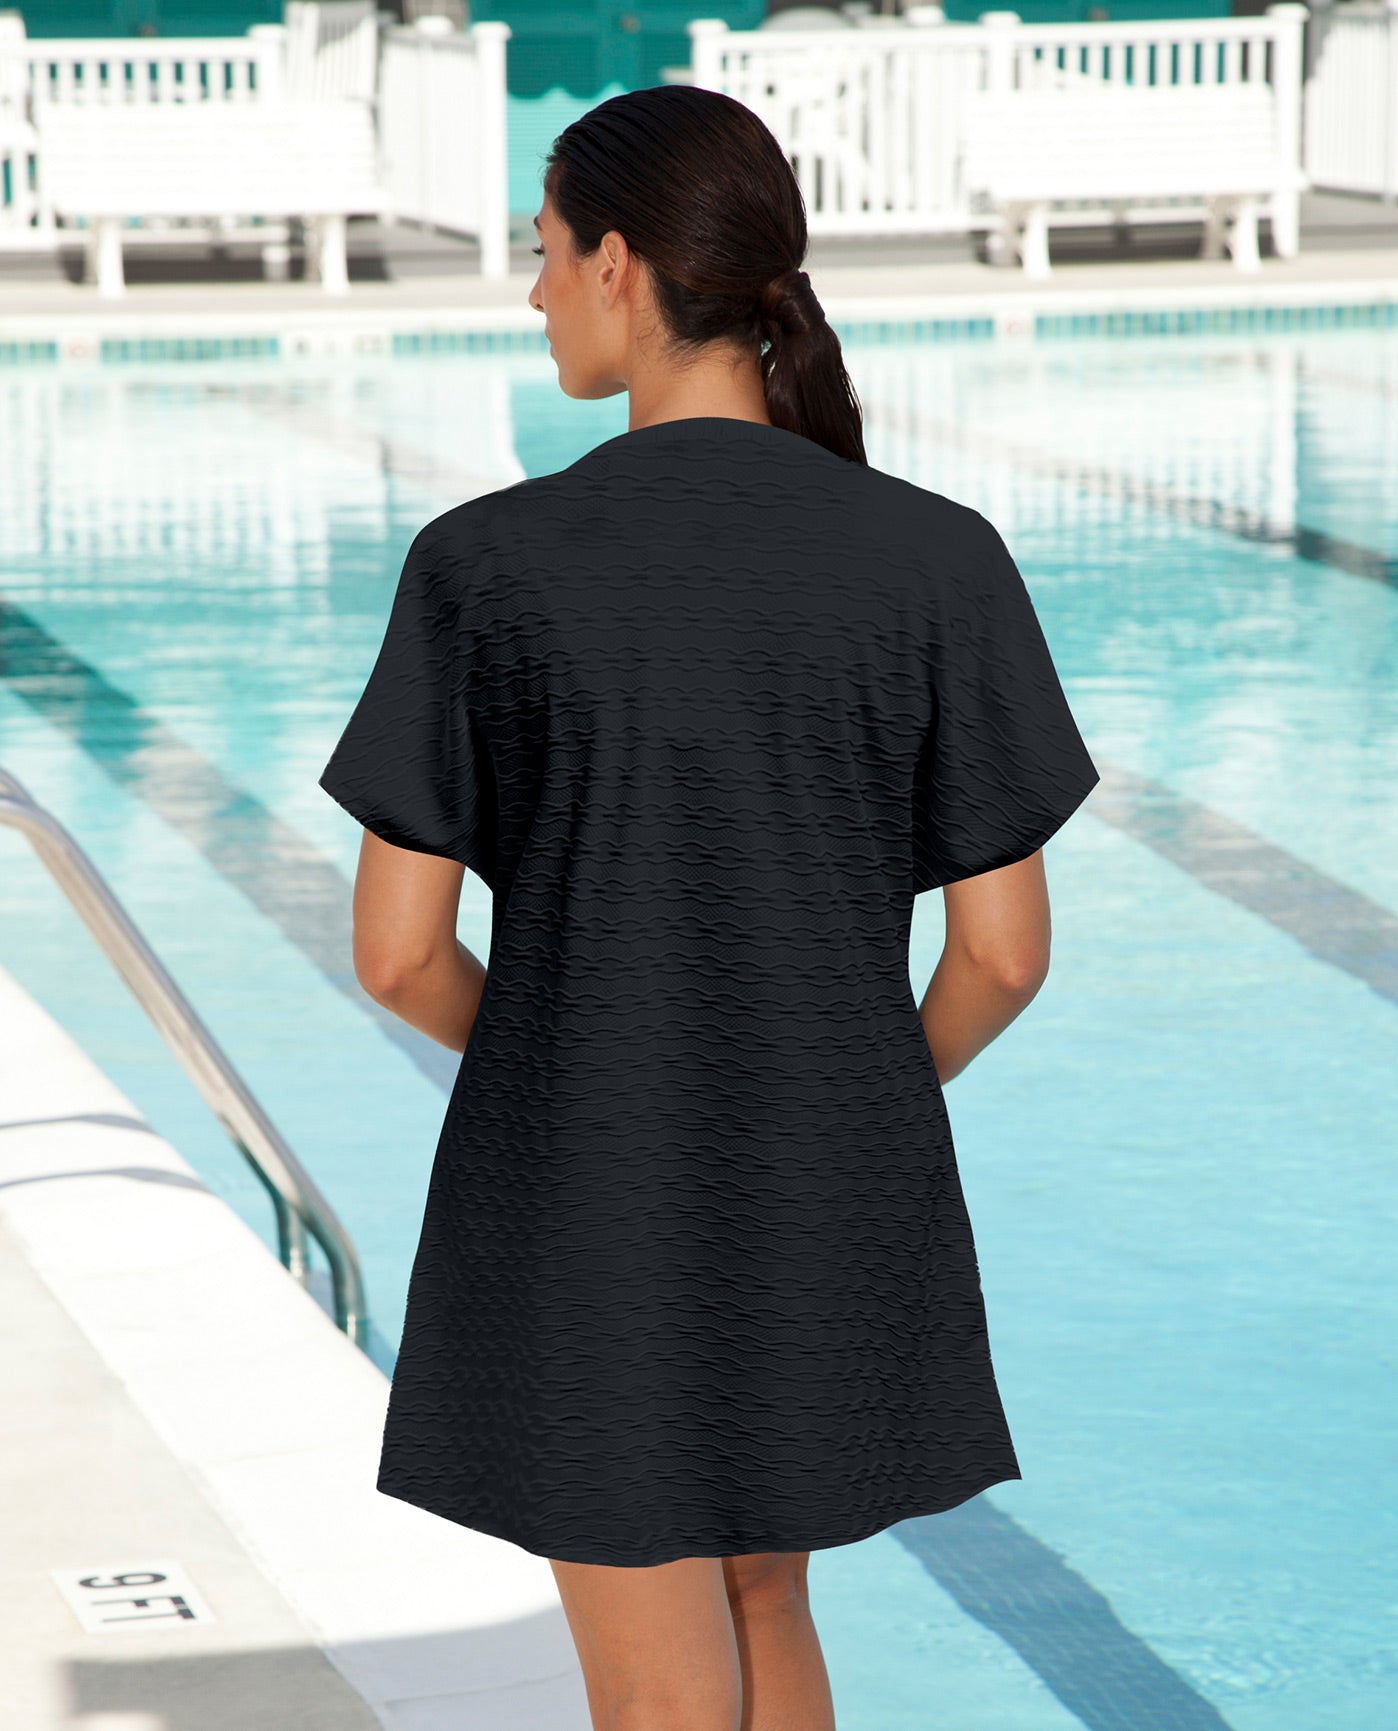 BACK VIEW OF AQUAMORE SOLID TEXTURED CAP SLEEVE BUTTON UP COVER UP TUNIC | 017 AQM TEXTURED BLACK